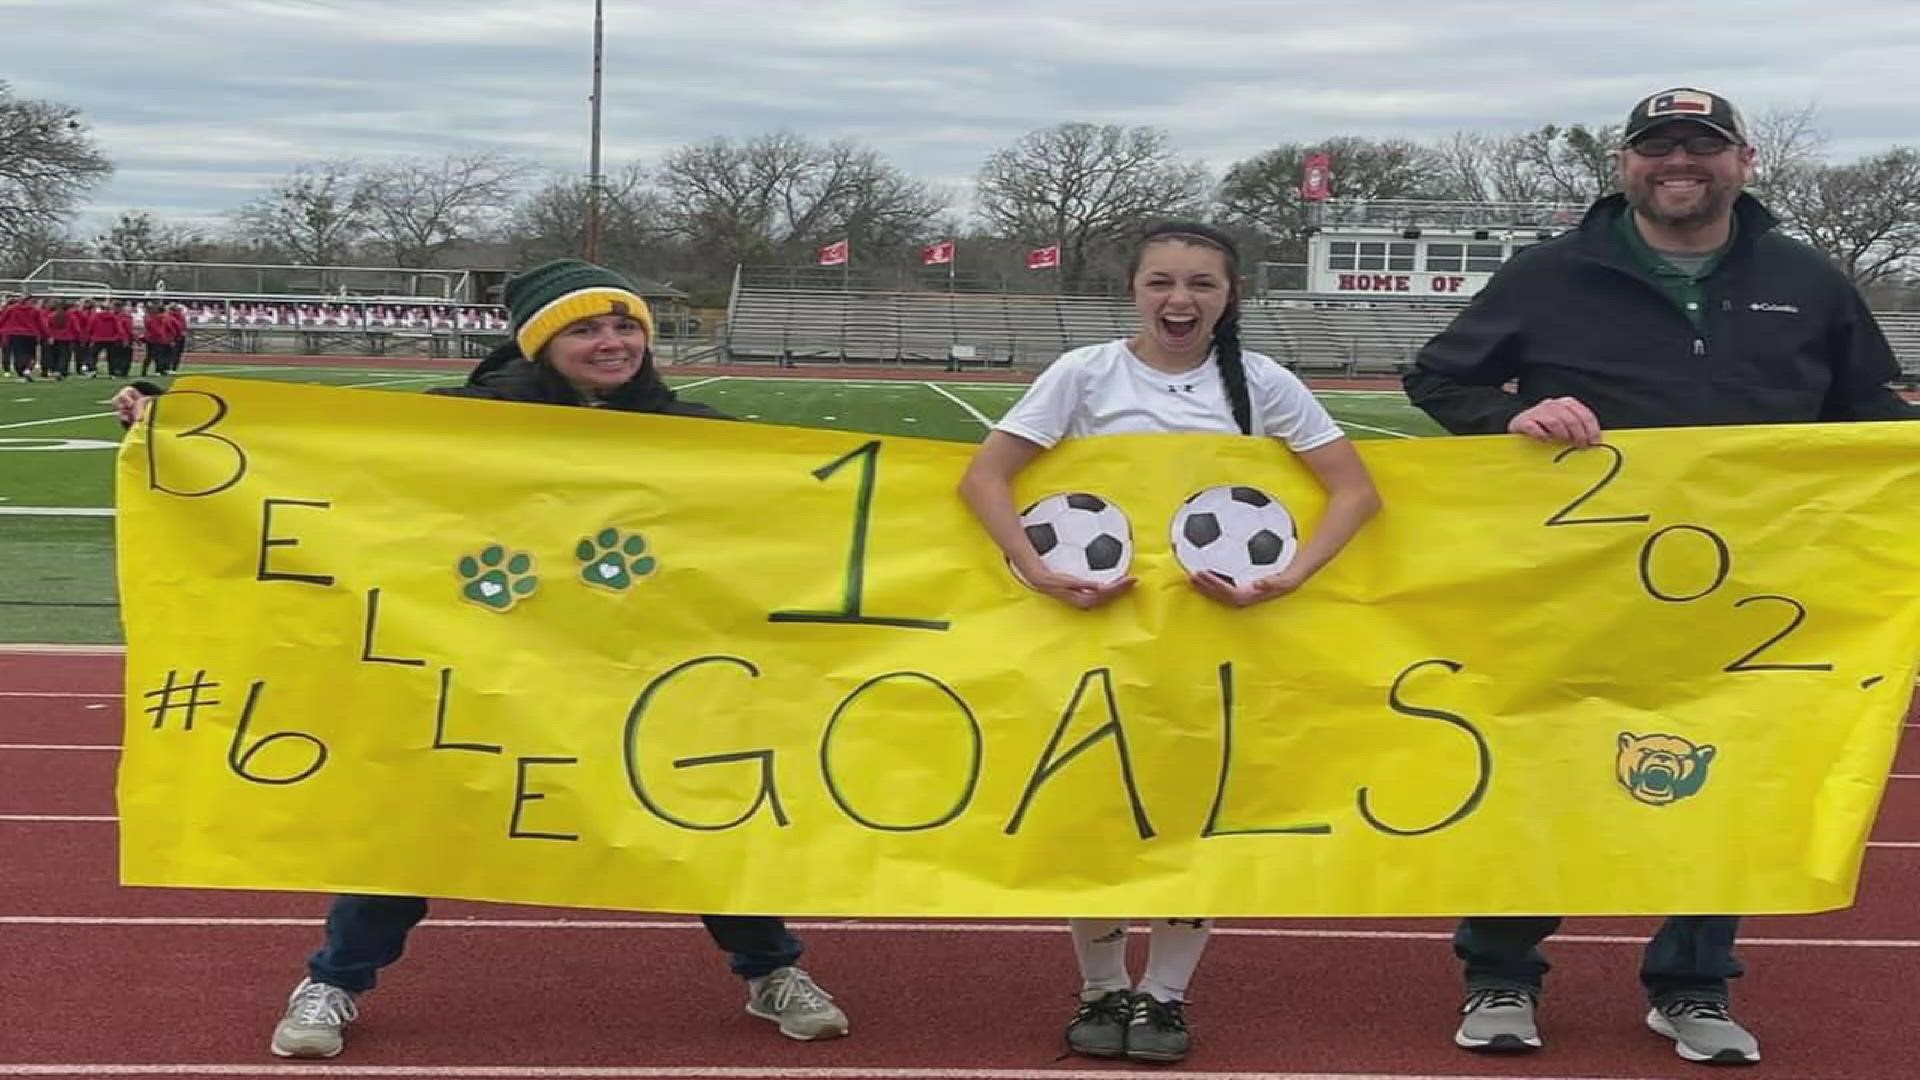 Annabelle Fisher, also known as Belle, earned her 100th goal in the Salado Eagle Classic against Fredericksburg.